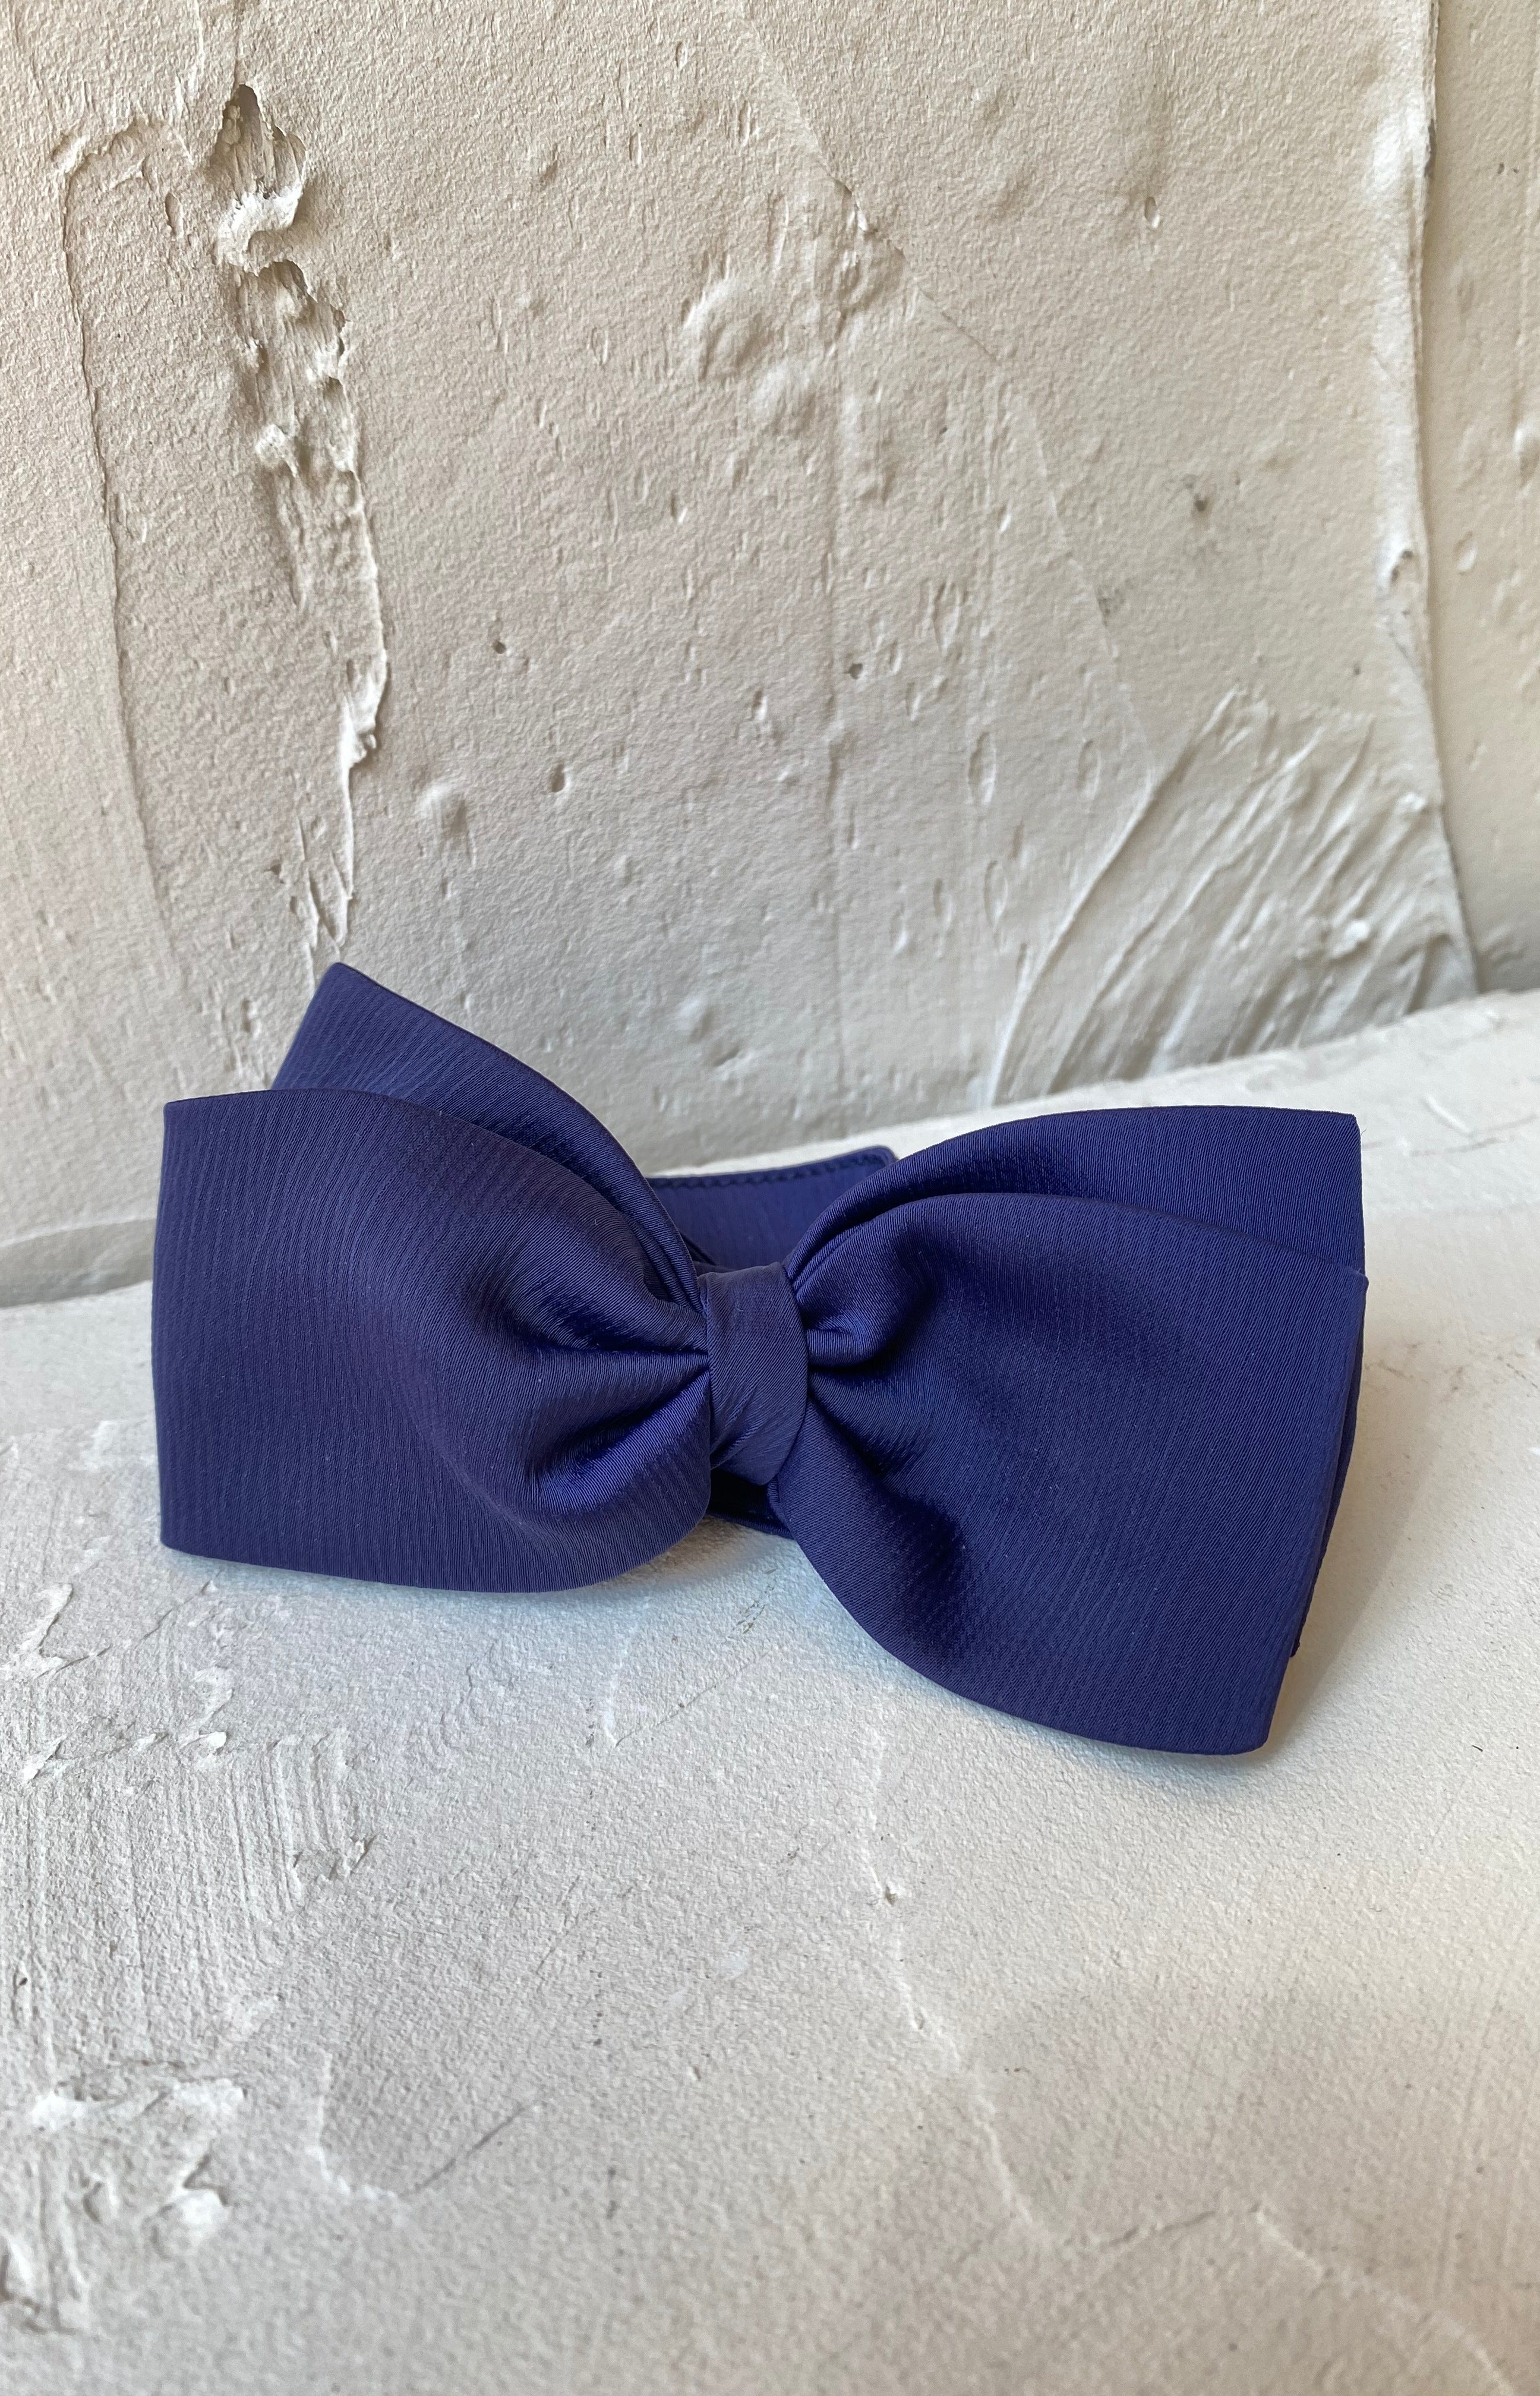 Satin Bow Tie and Pocket Square - Midnight